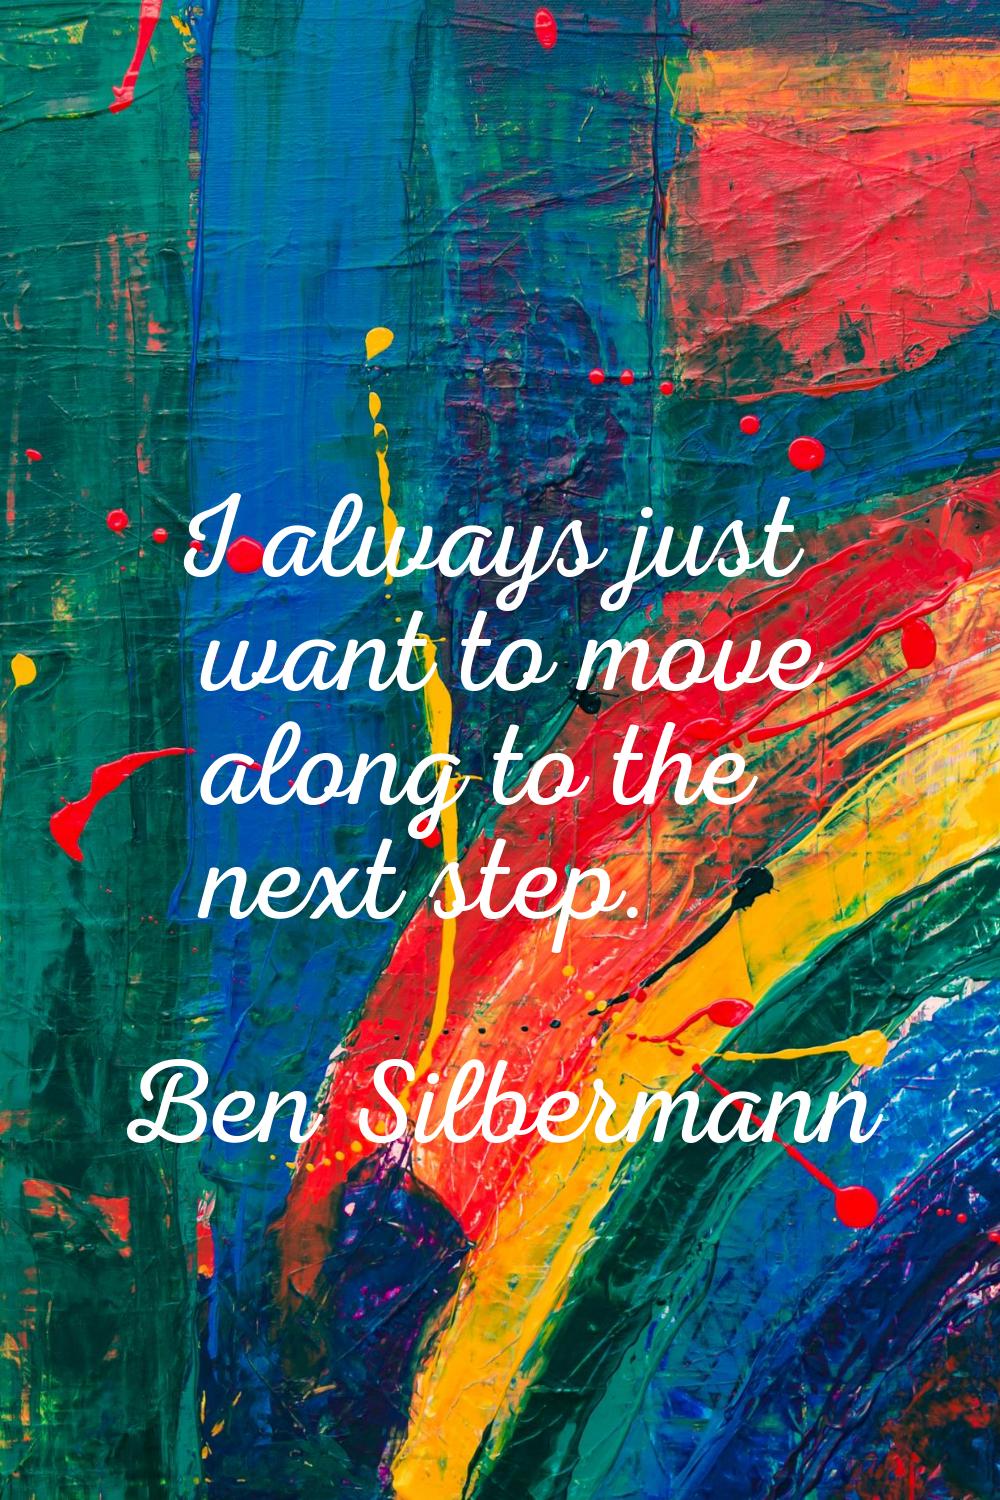 I always just want to move along to the next step.